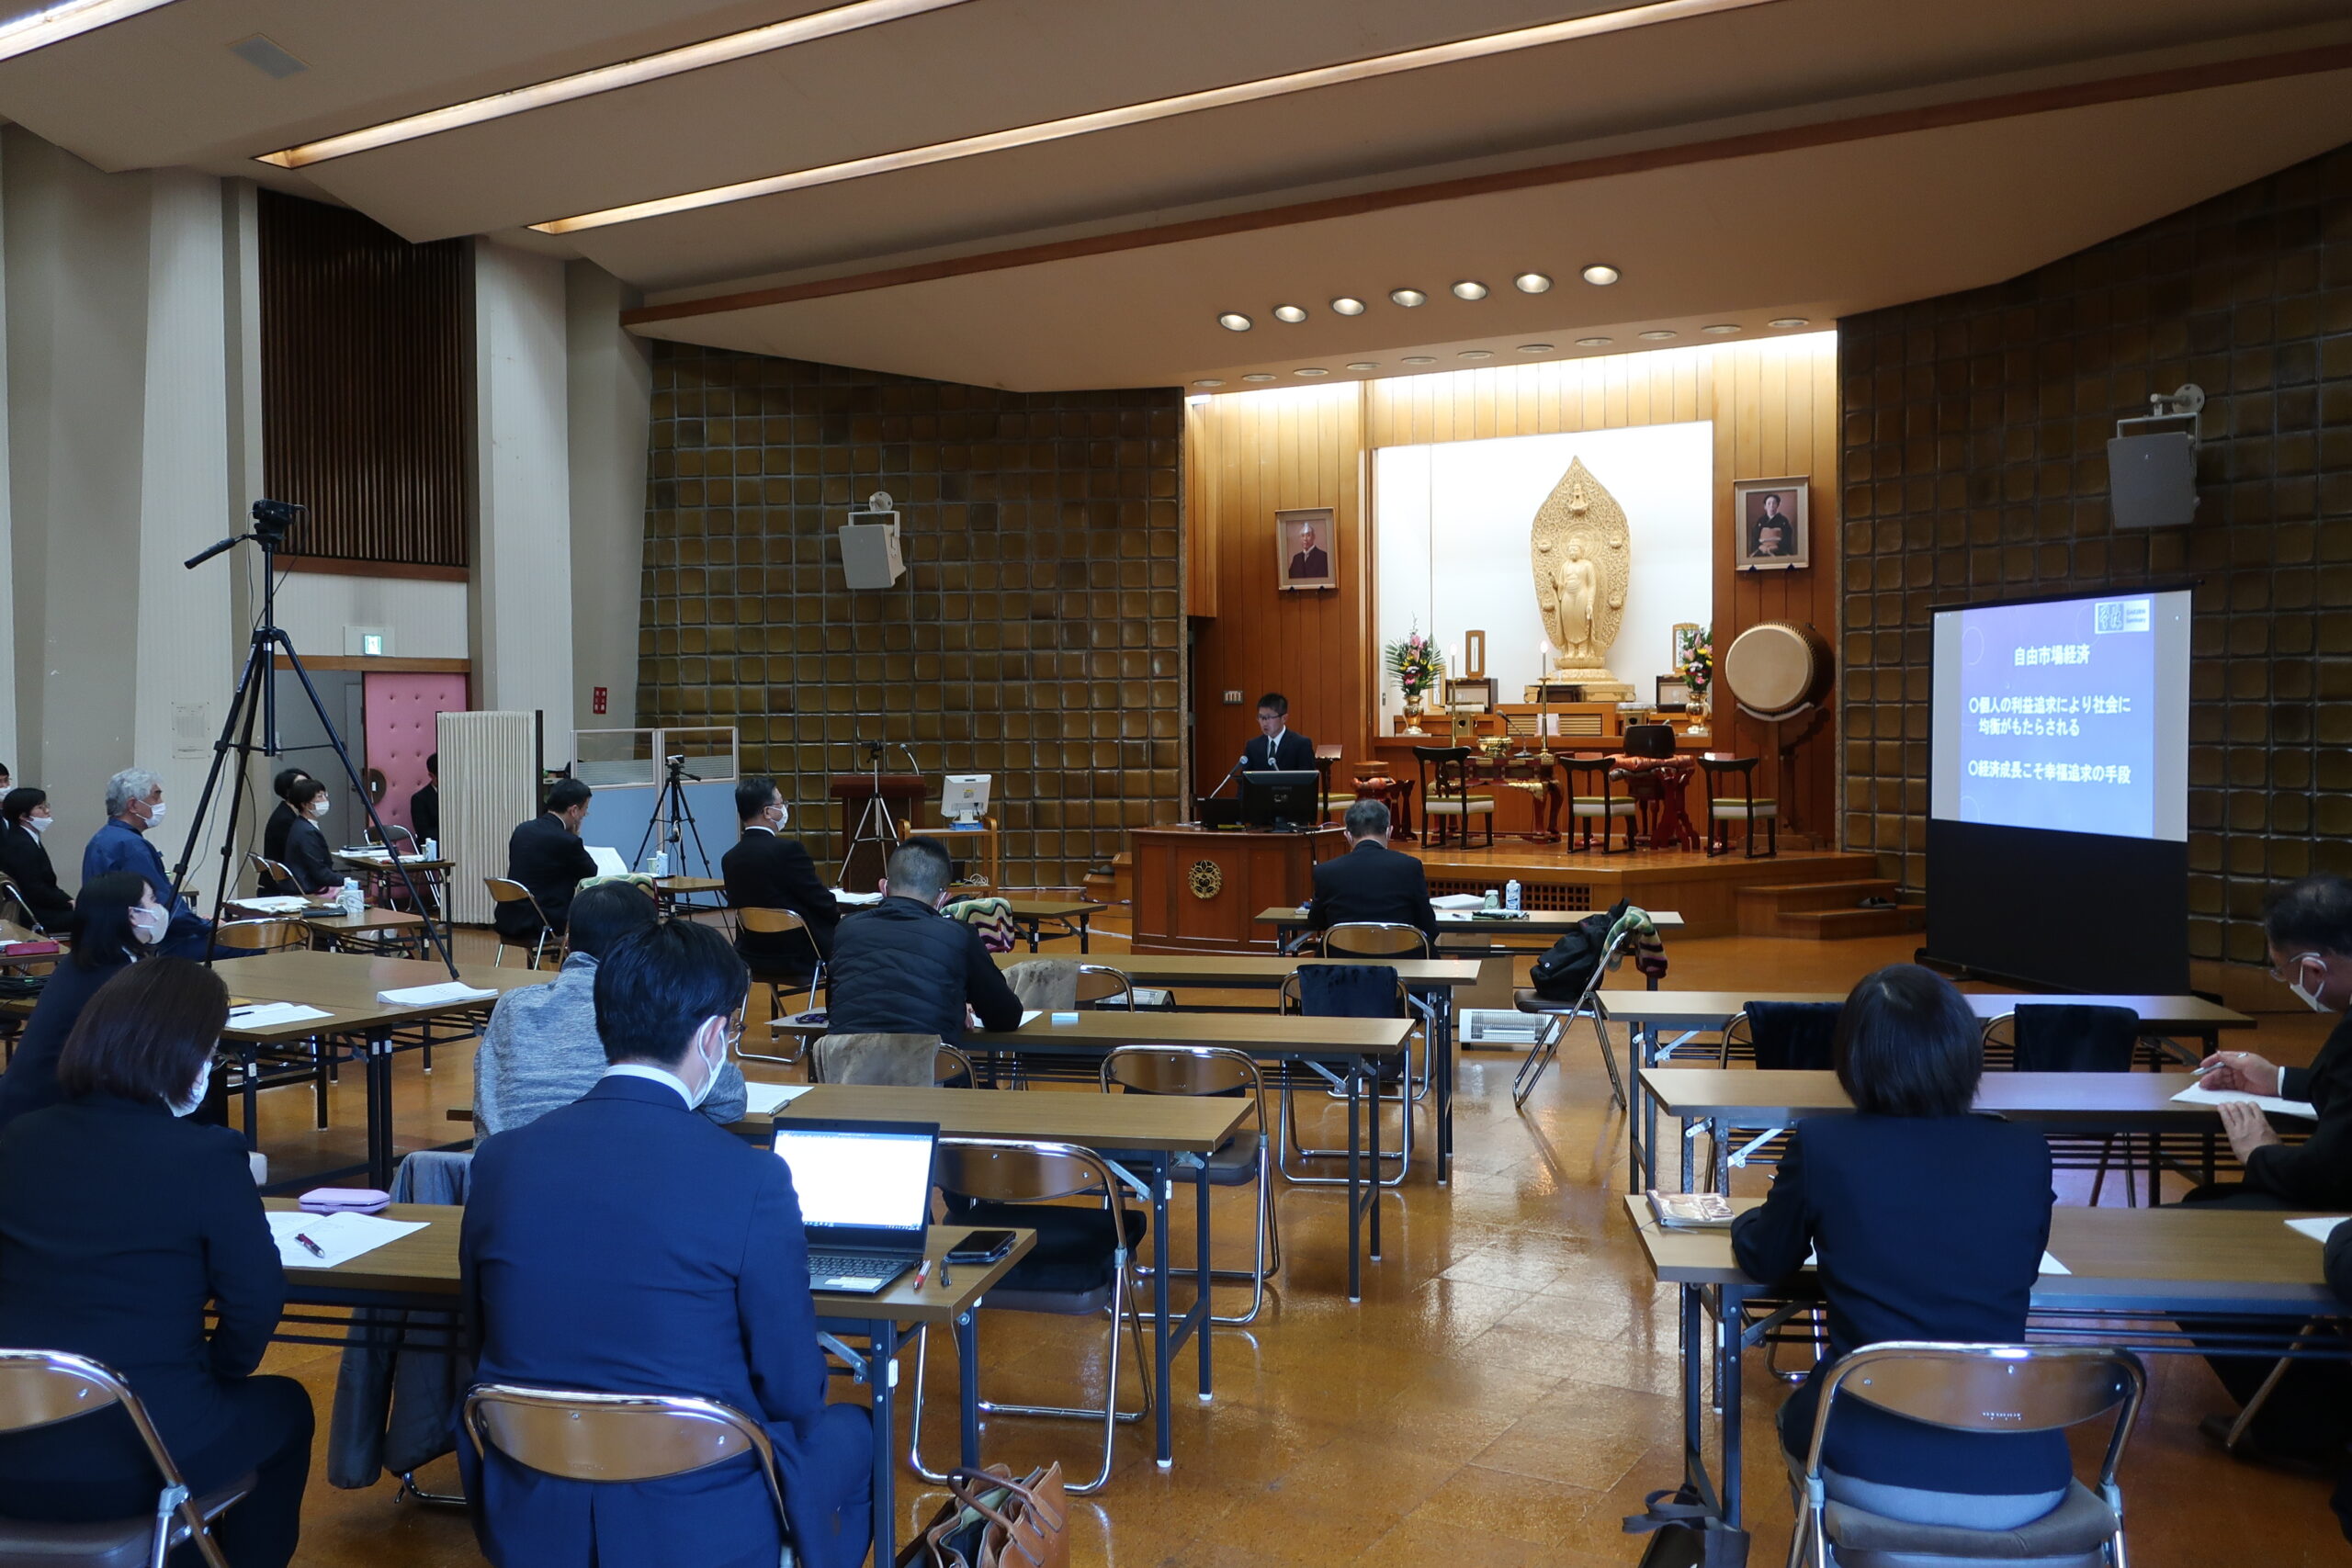 Graduation Research Presentation: Gakurin Honka 57th Class Responds to Contemporary Issues and Proposes Creative Way Forward